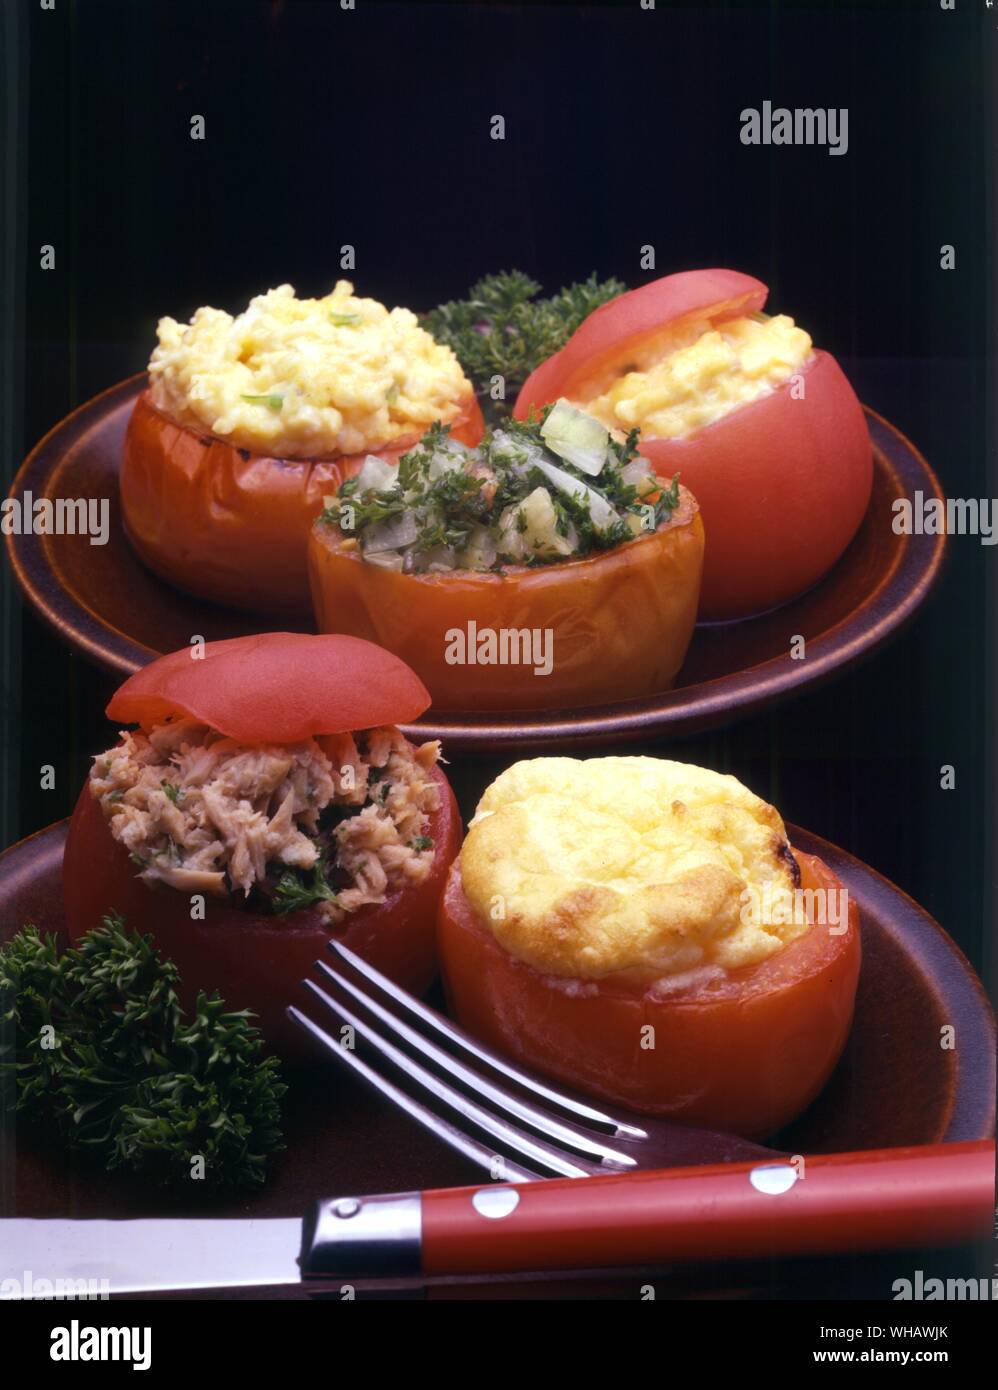 French Cooking By Eileen Reece.. . Tomato Farcies.. Hot Or Cold Stuffed Tomatoes.. Eggs, Spinach And Tuna Fish.. . Foreground.. Petits Souffles Aux Tomates.. Souffles In Tomato Cases.. . Stock Photo